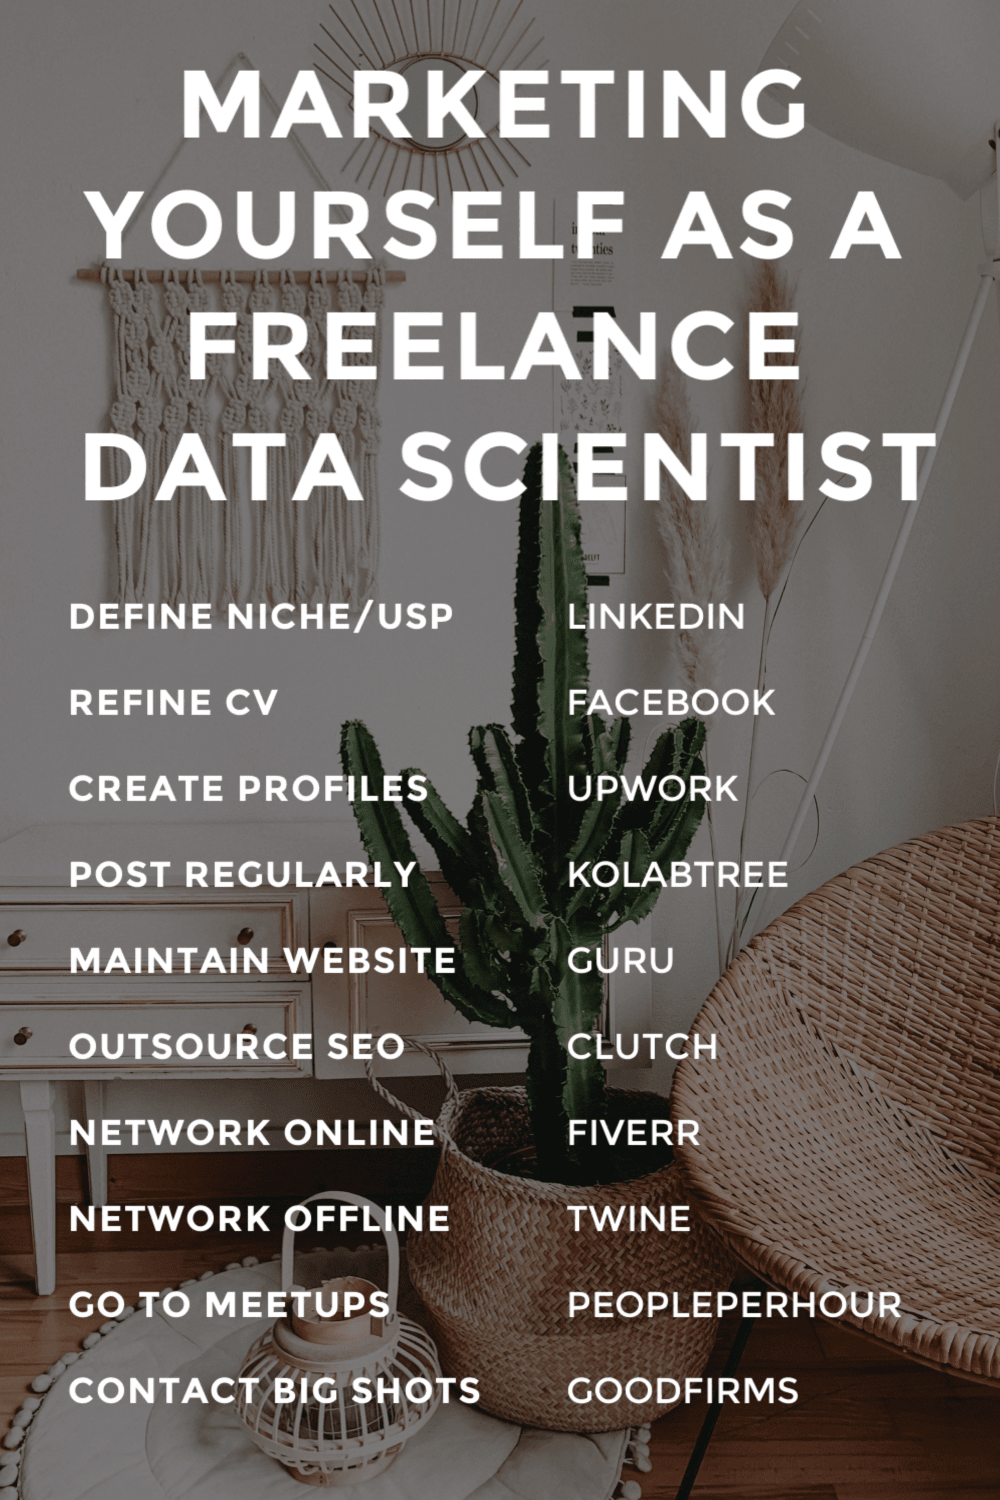 Marketing yourself as a a freelance data scientist